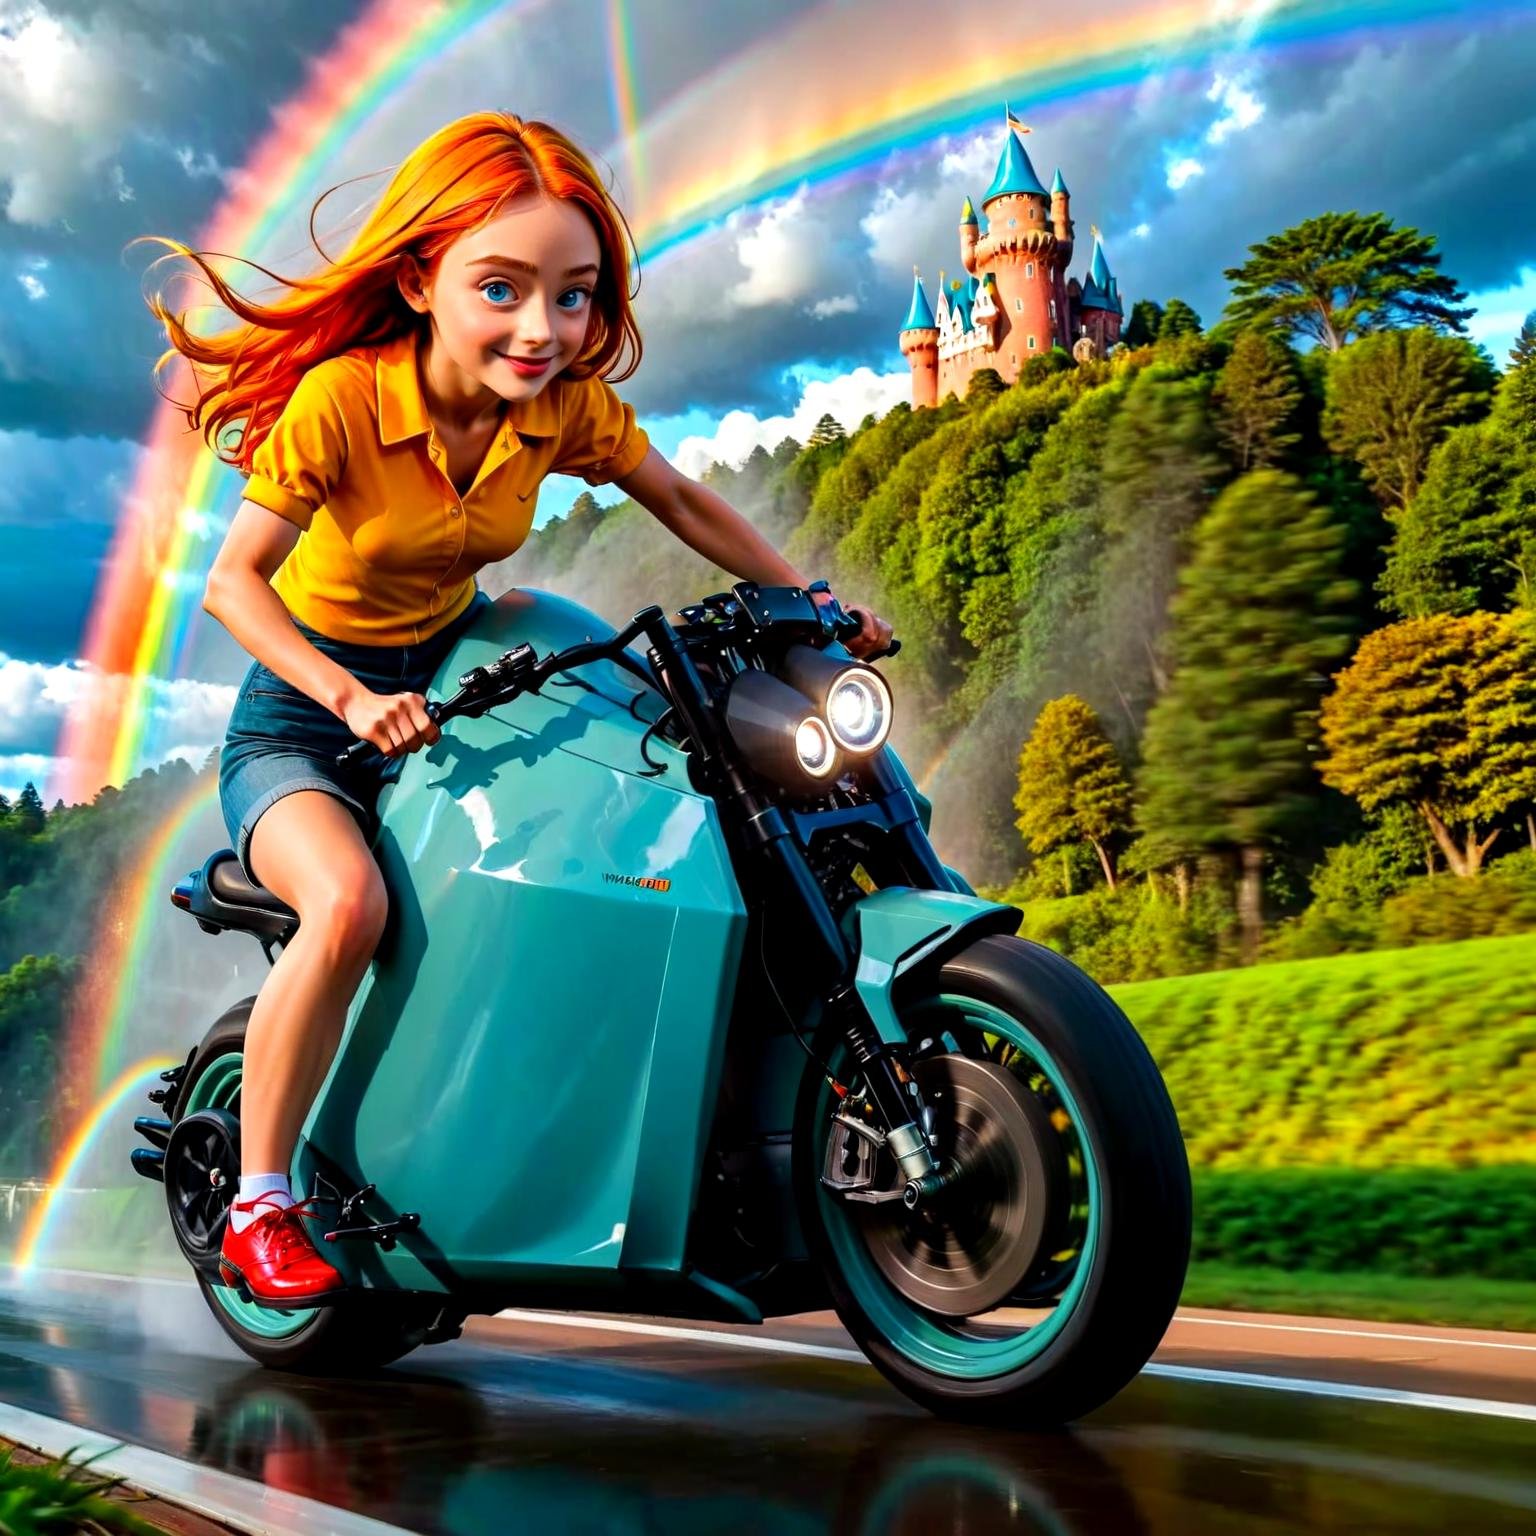 Ankama vivid animation style she riding a DC100 at a rainbow in wonderland, ,(dc100:1.05), hyperrealistic,,. Vibrant colors, expansive storyworlds, stylized characters, flowing motion